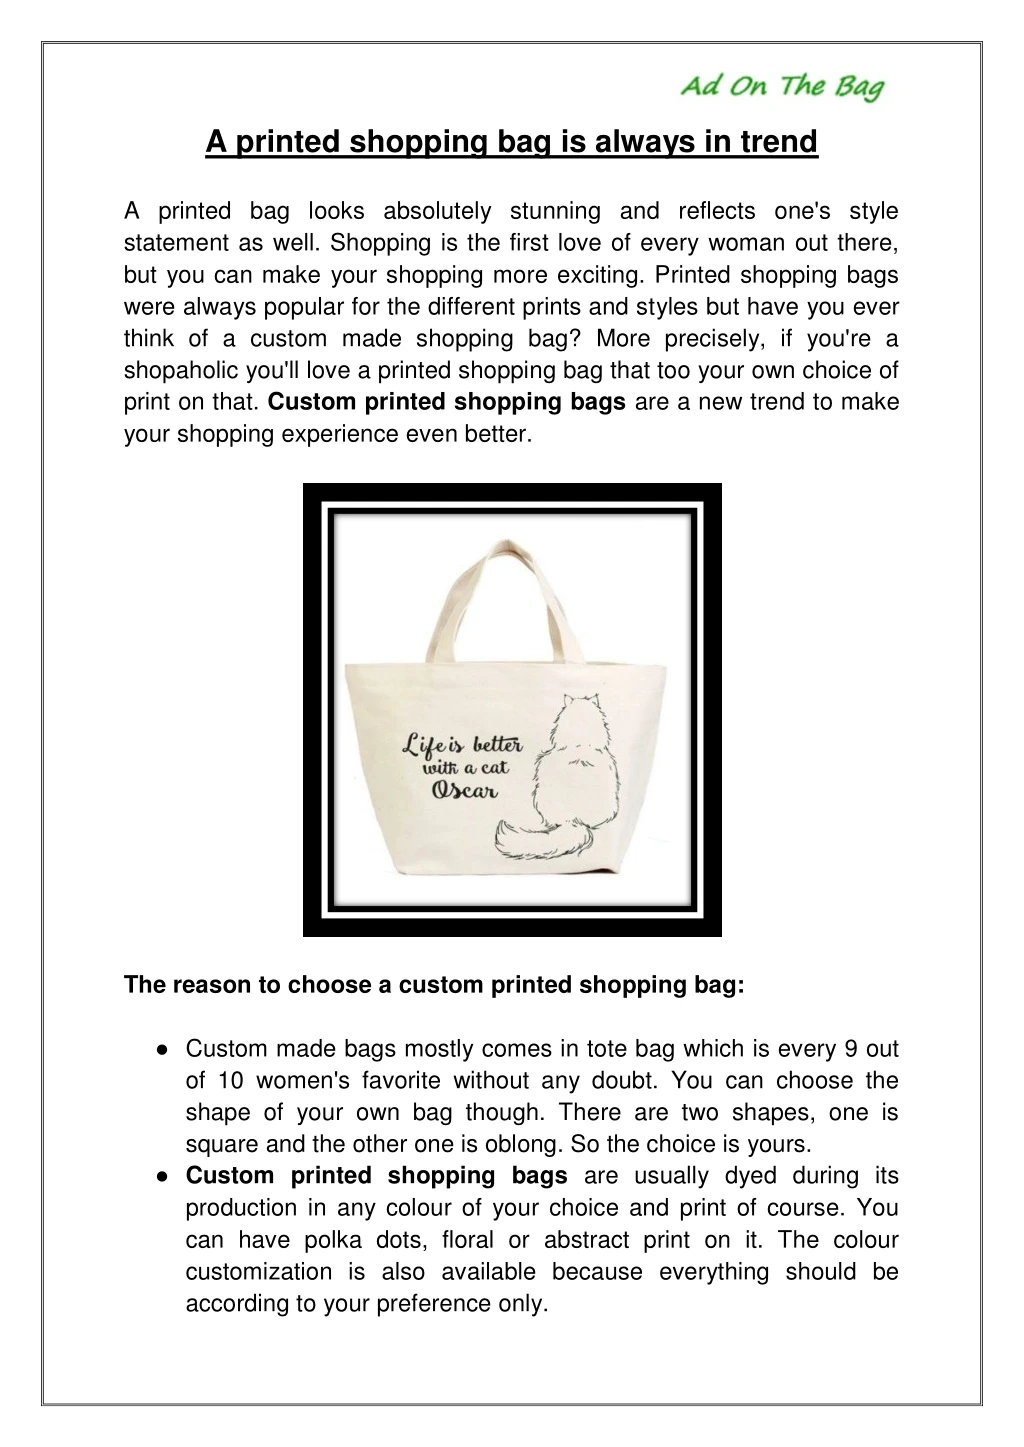 a printed shopping bag is always in trend